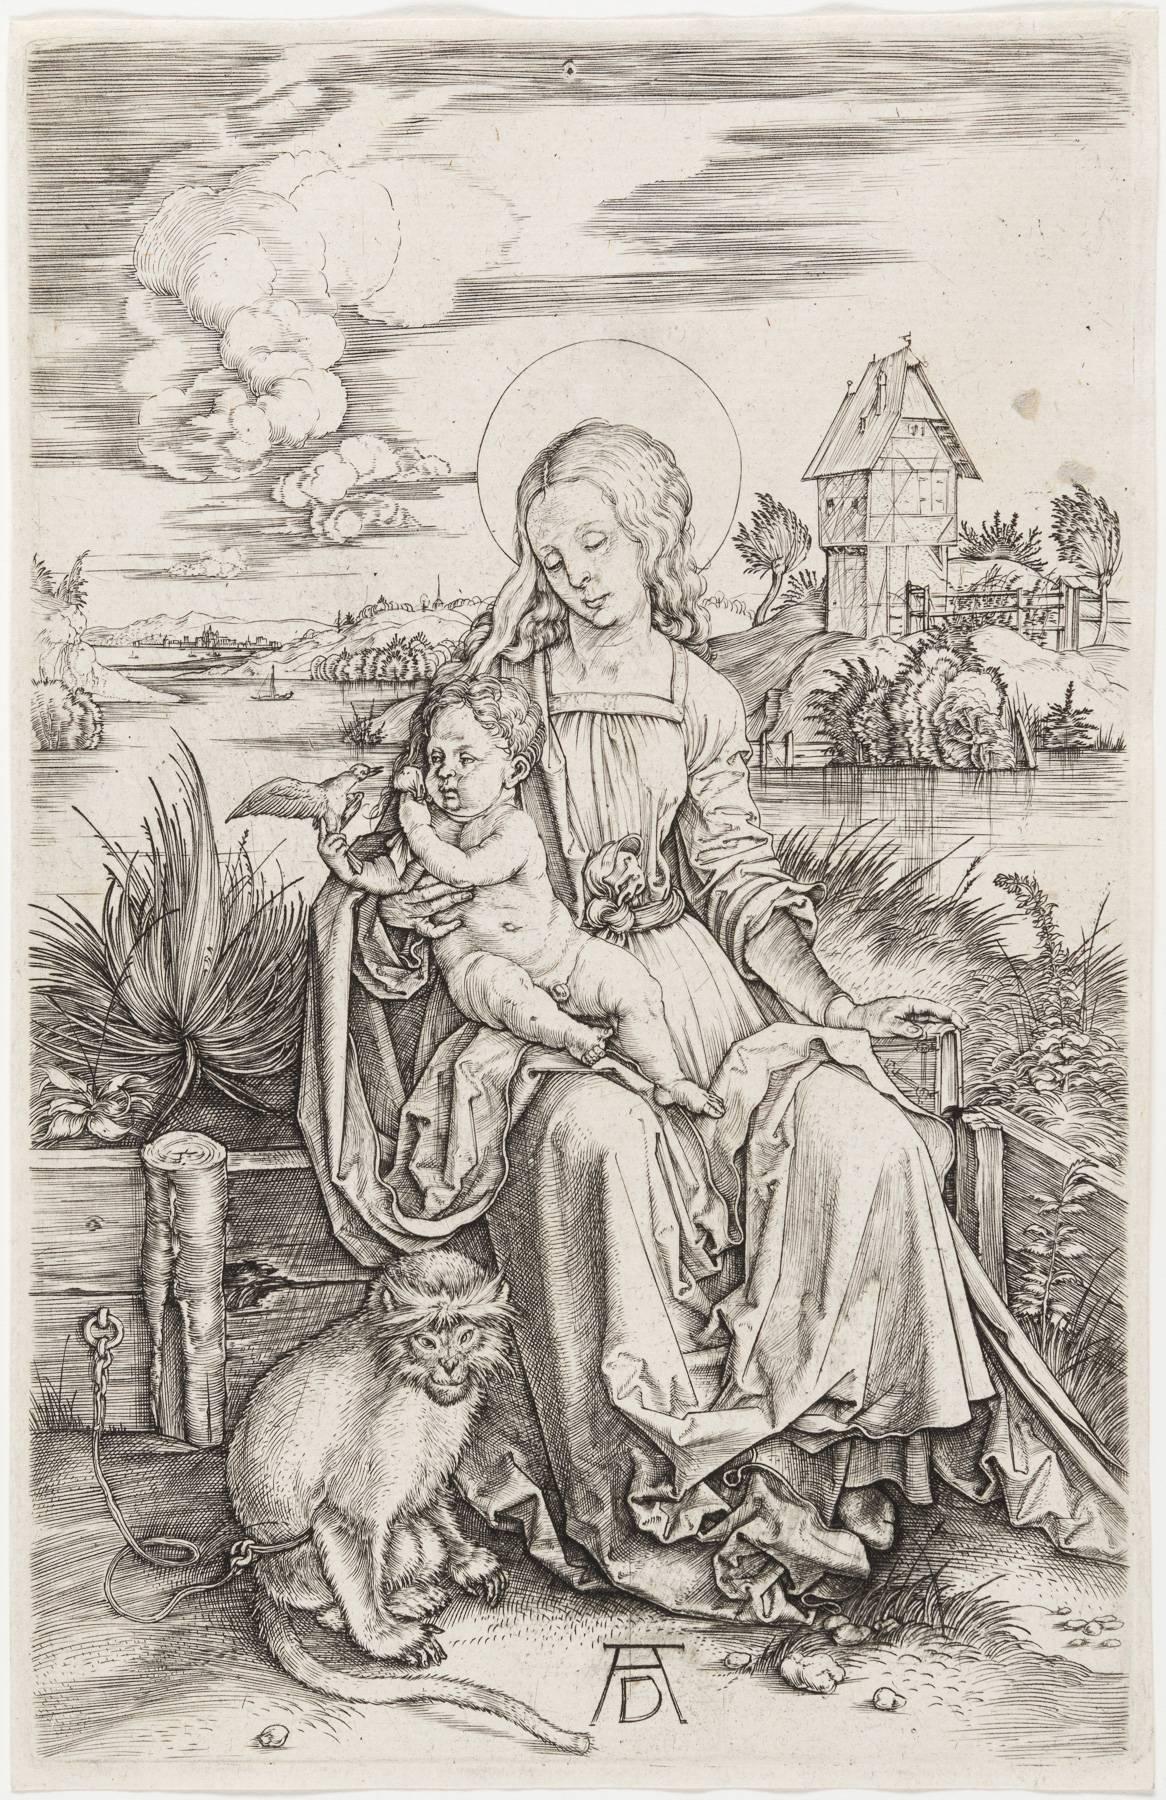 Madonna and Child with the Monkey - Print by Albrecht Dürer